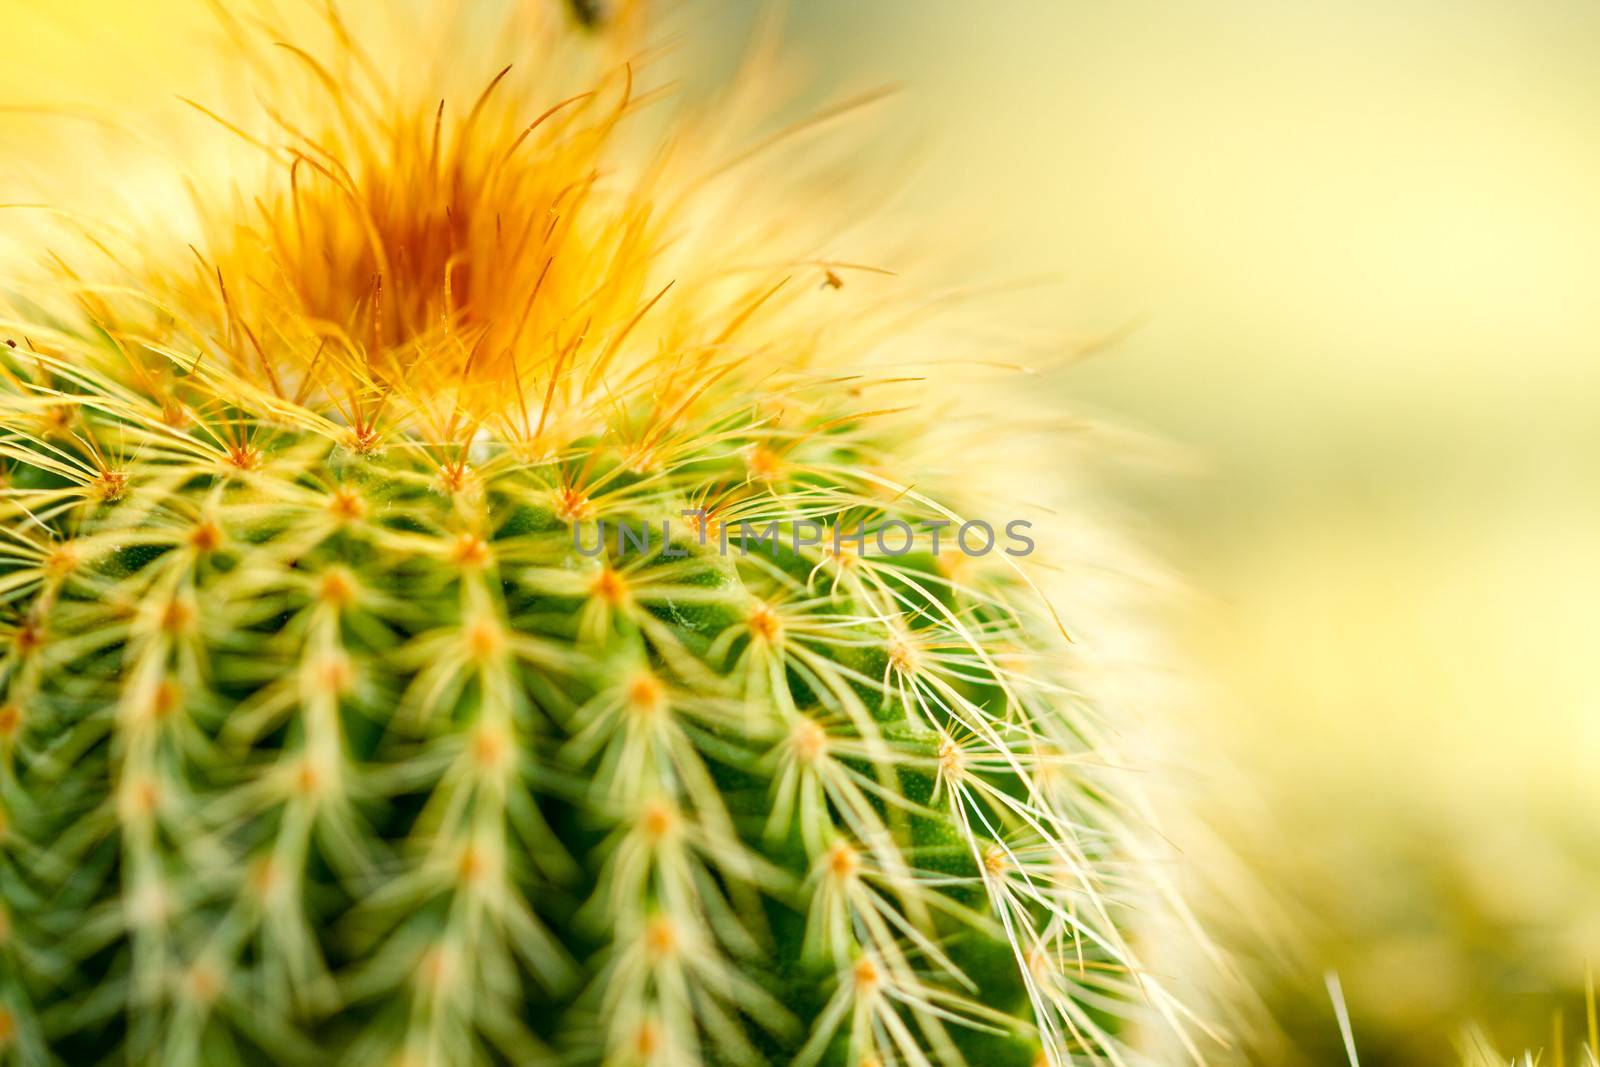 Cactus Thorn Close up by azamshah72